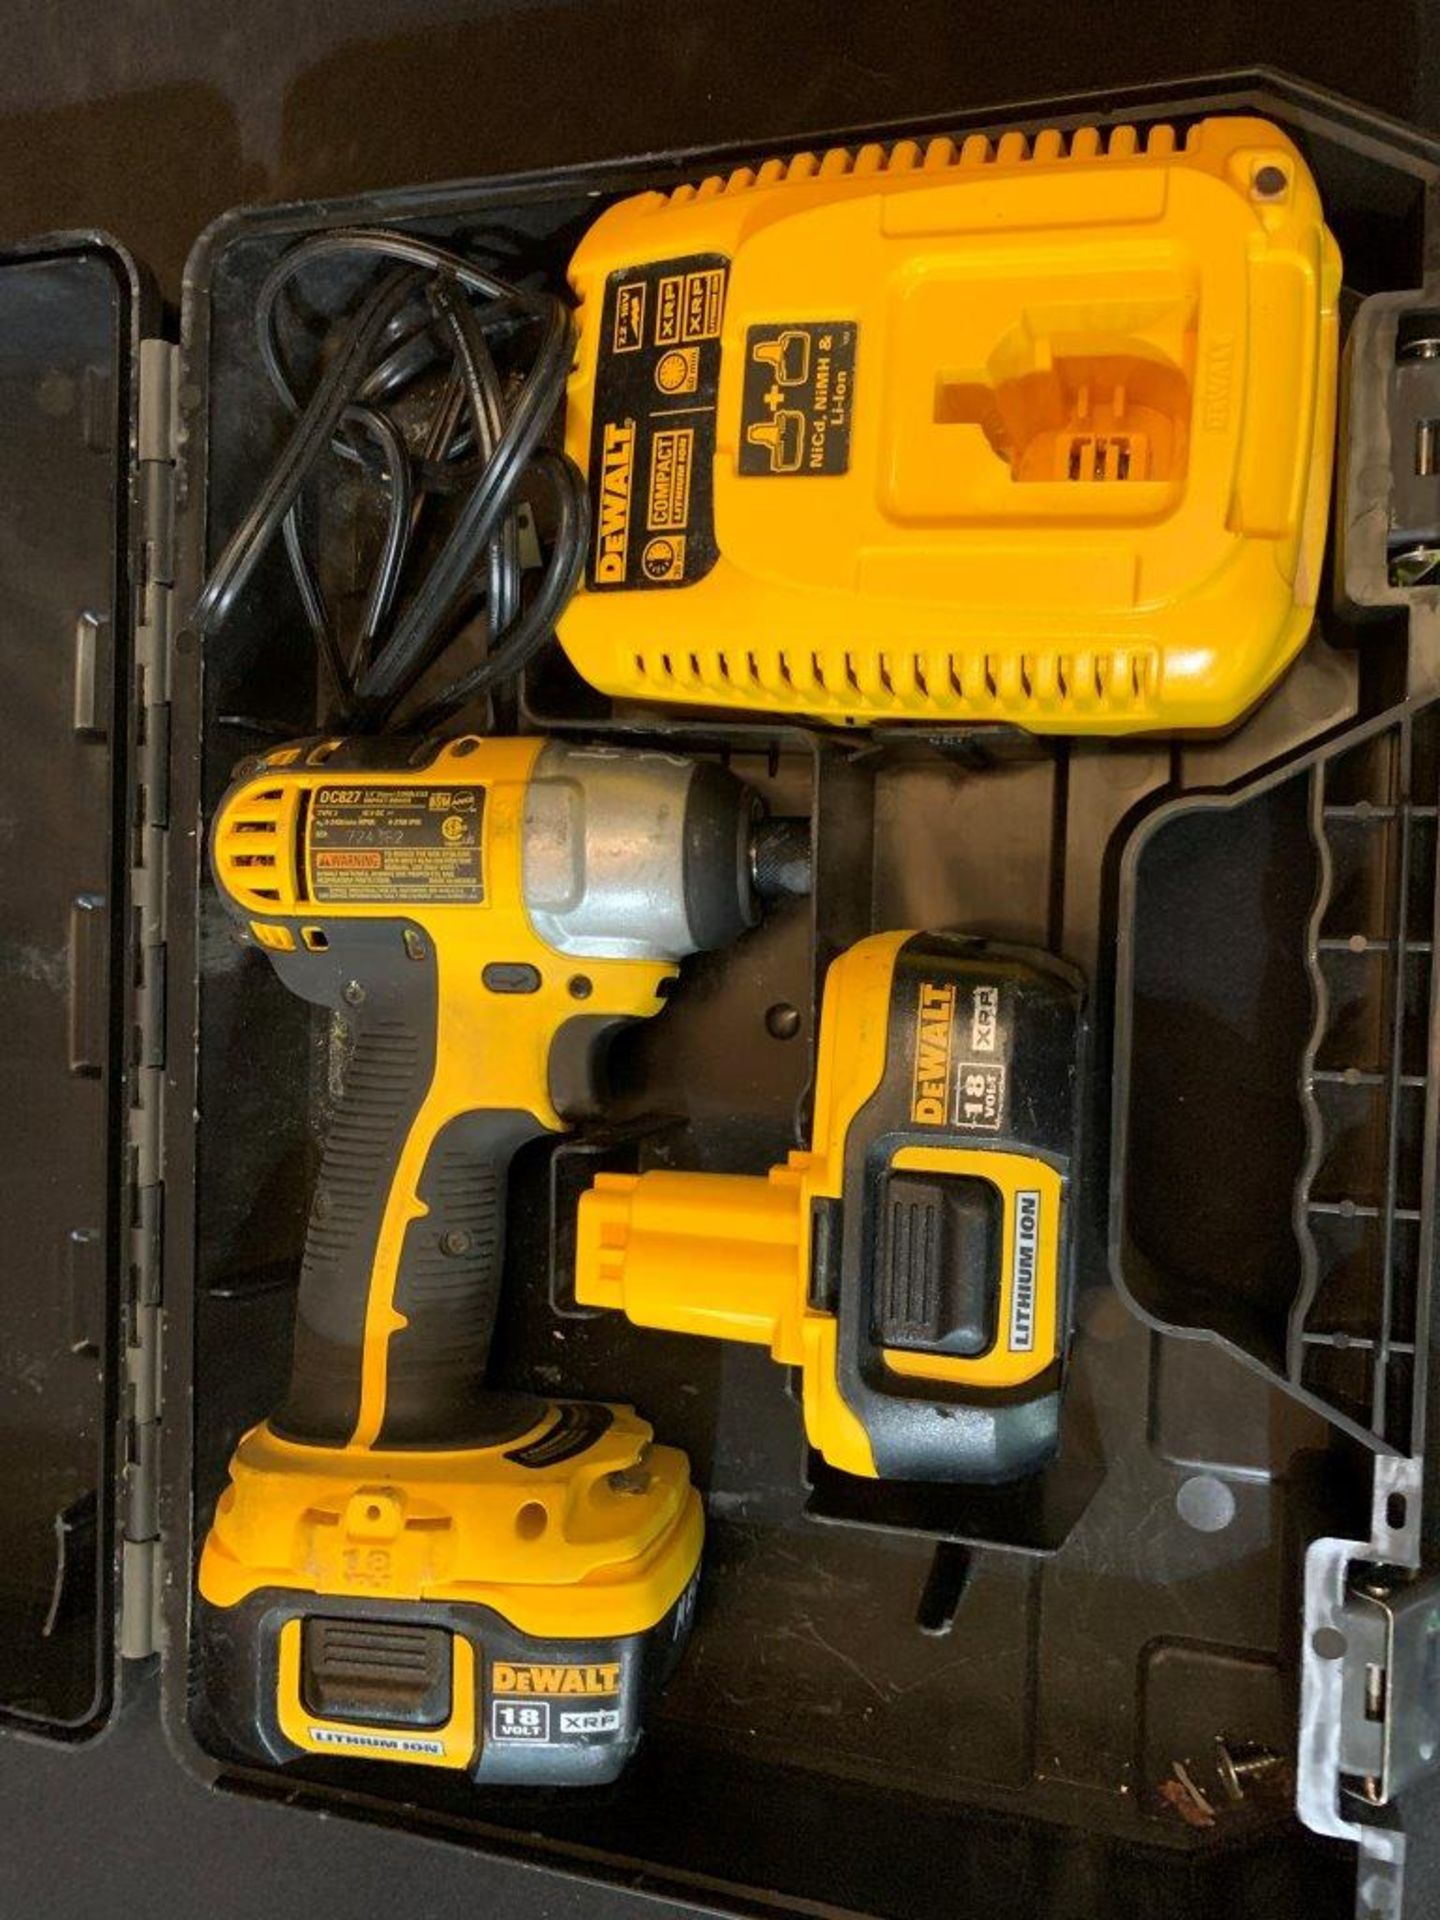 DEWALT 18V XRP CORDLESS IMPACT DRIVER W/ 2-BATTERIES AND CHARGER - Image 2 of 3